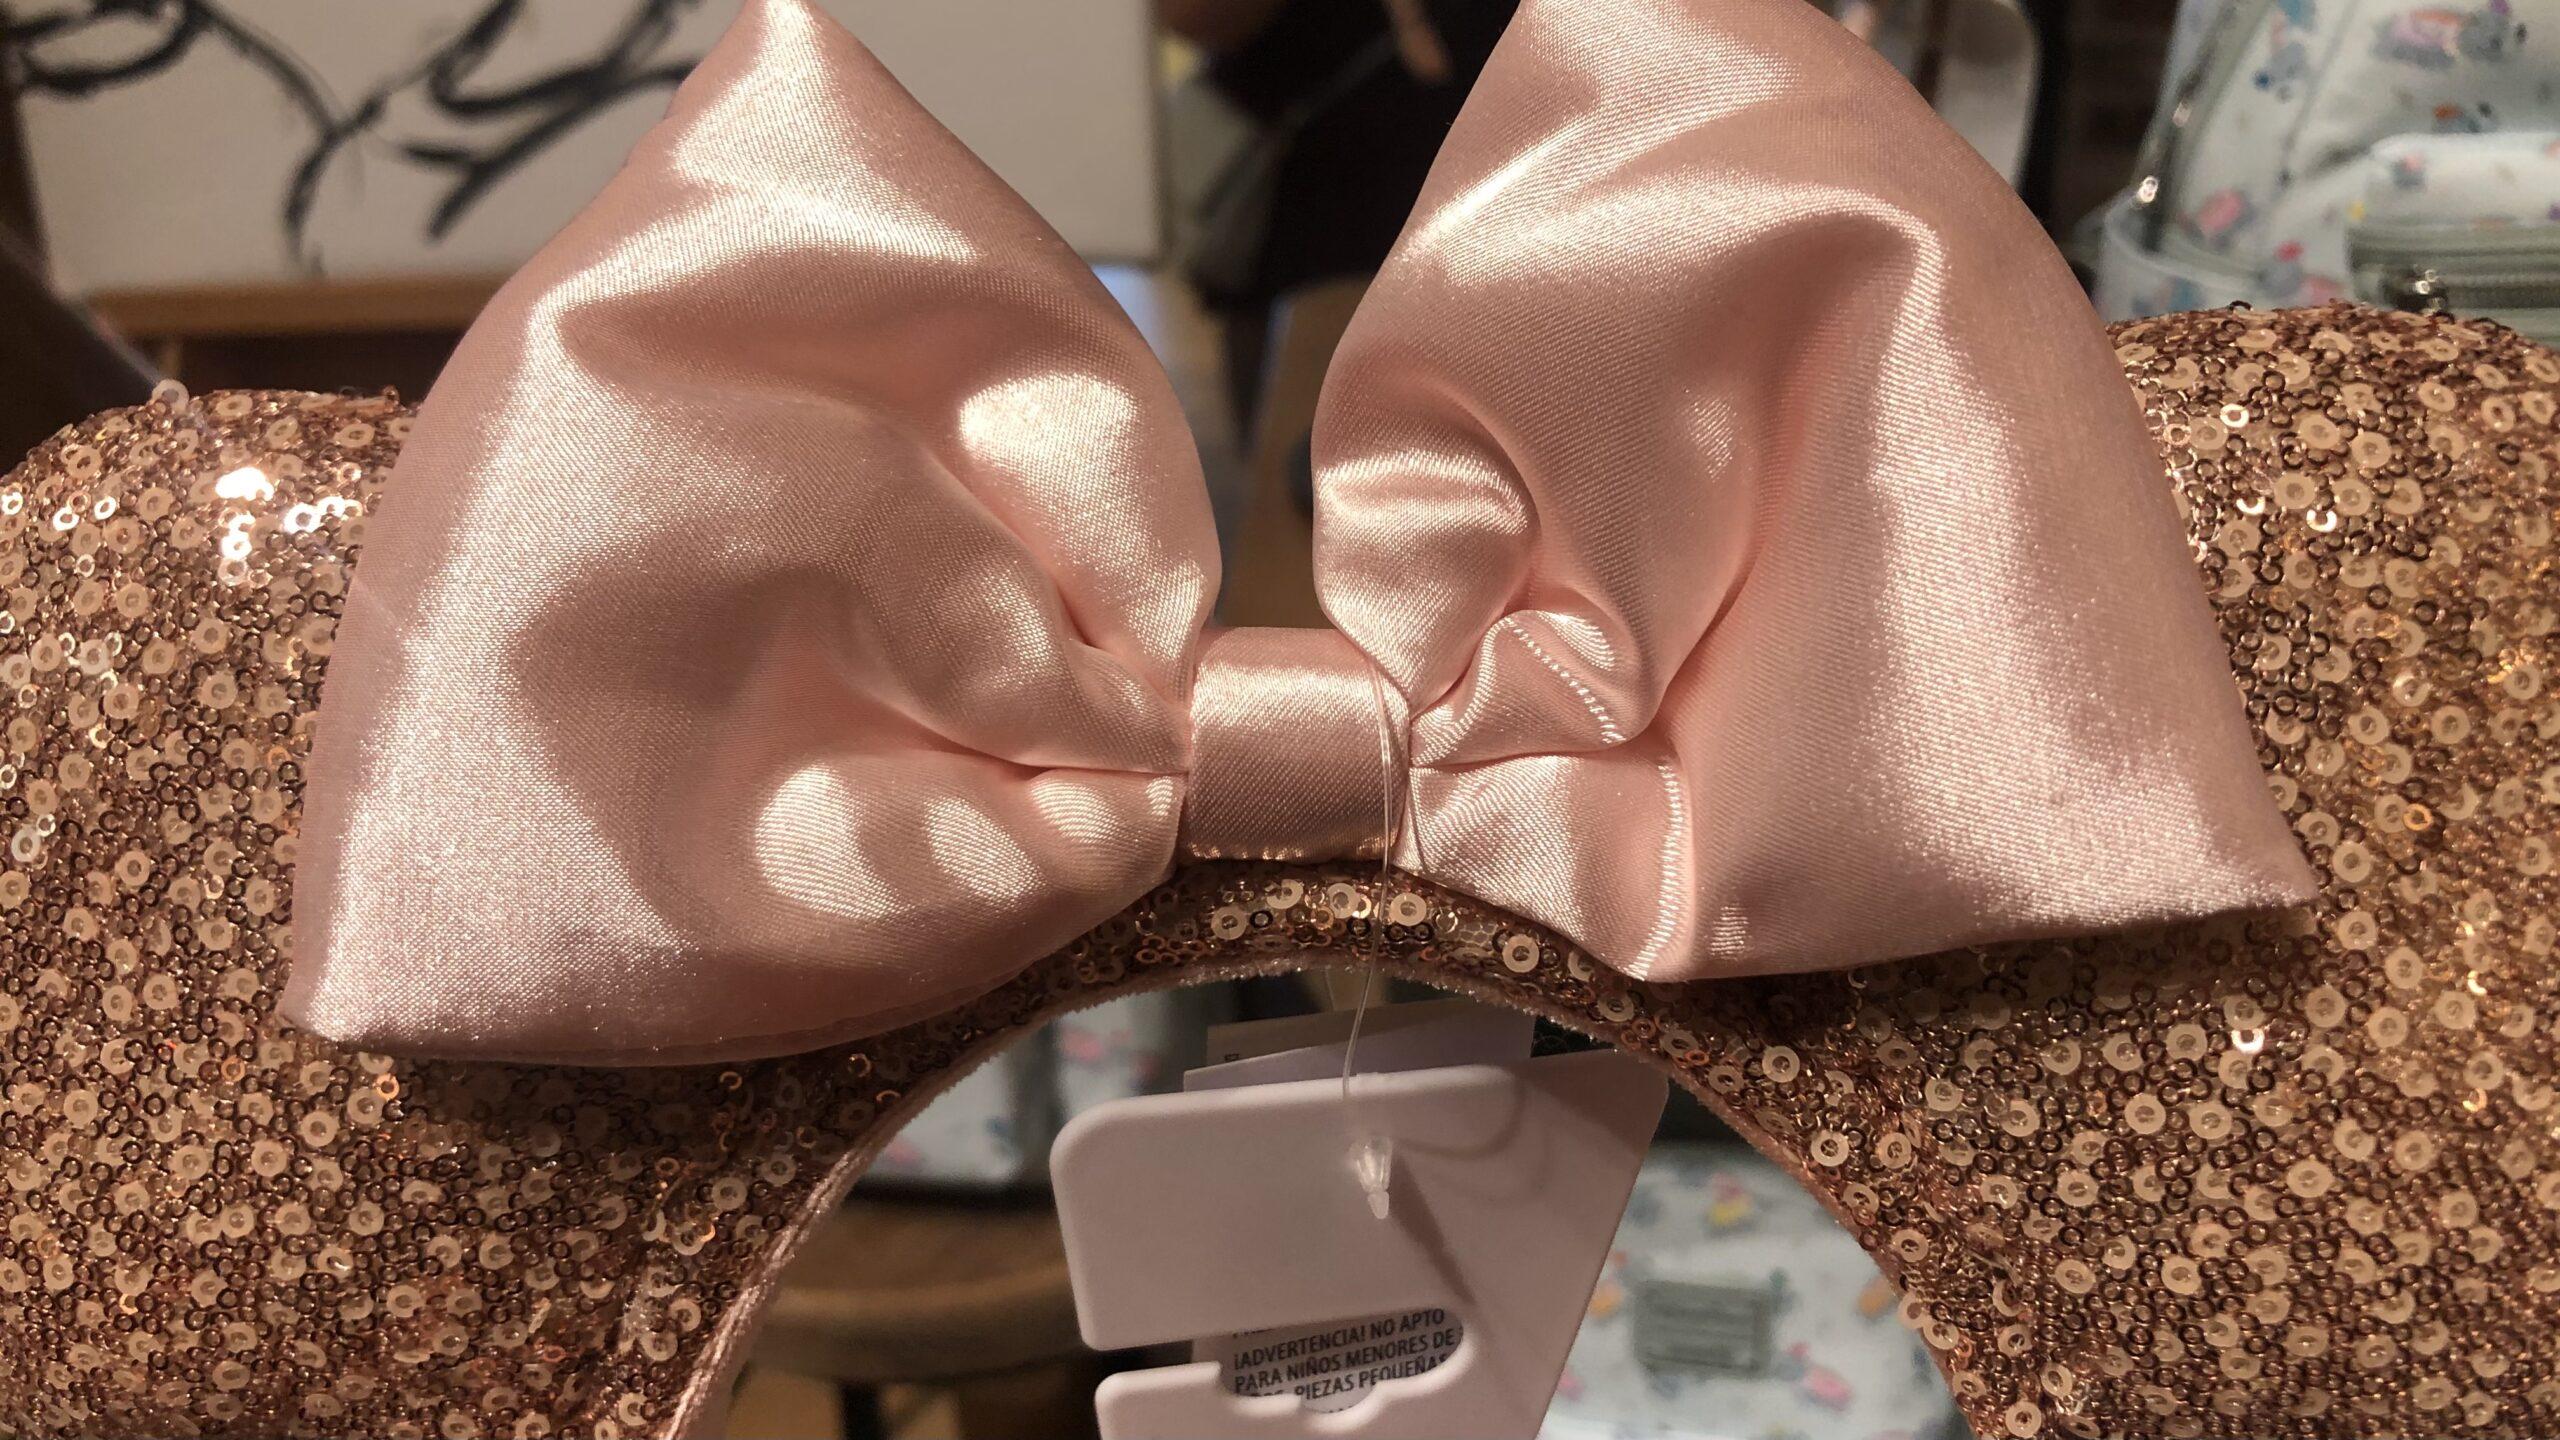 New Rose Gold Minnie Ears Arrive at Disney Springs